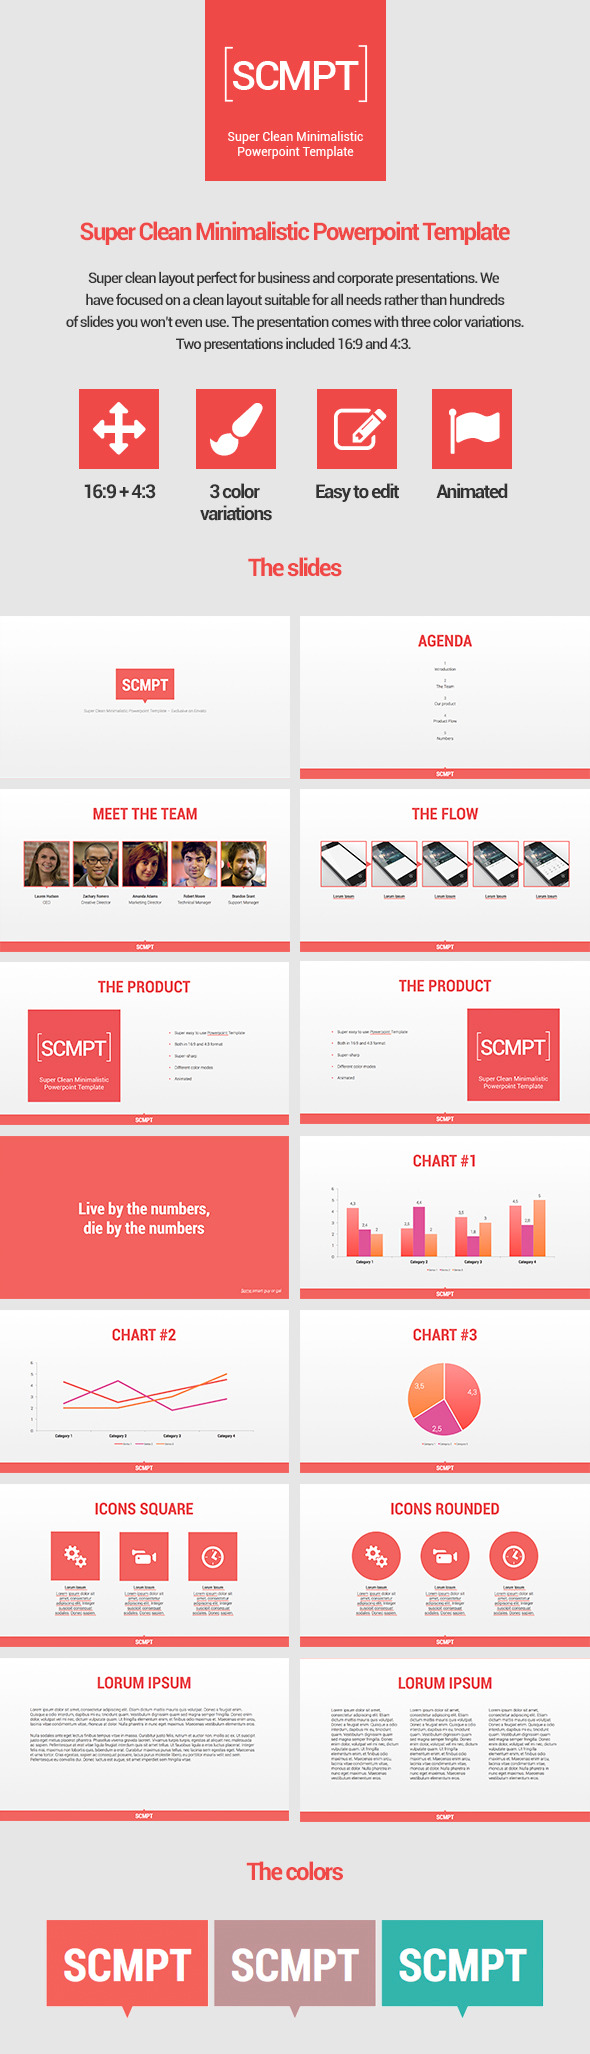 Super Clean Minimalistic Powerpoint Template